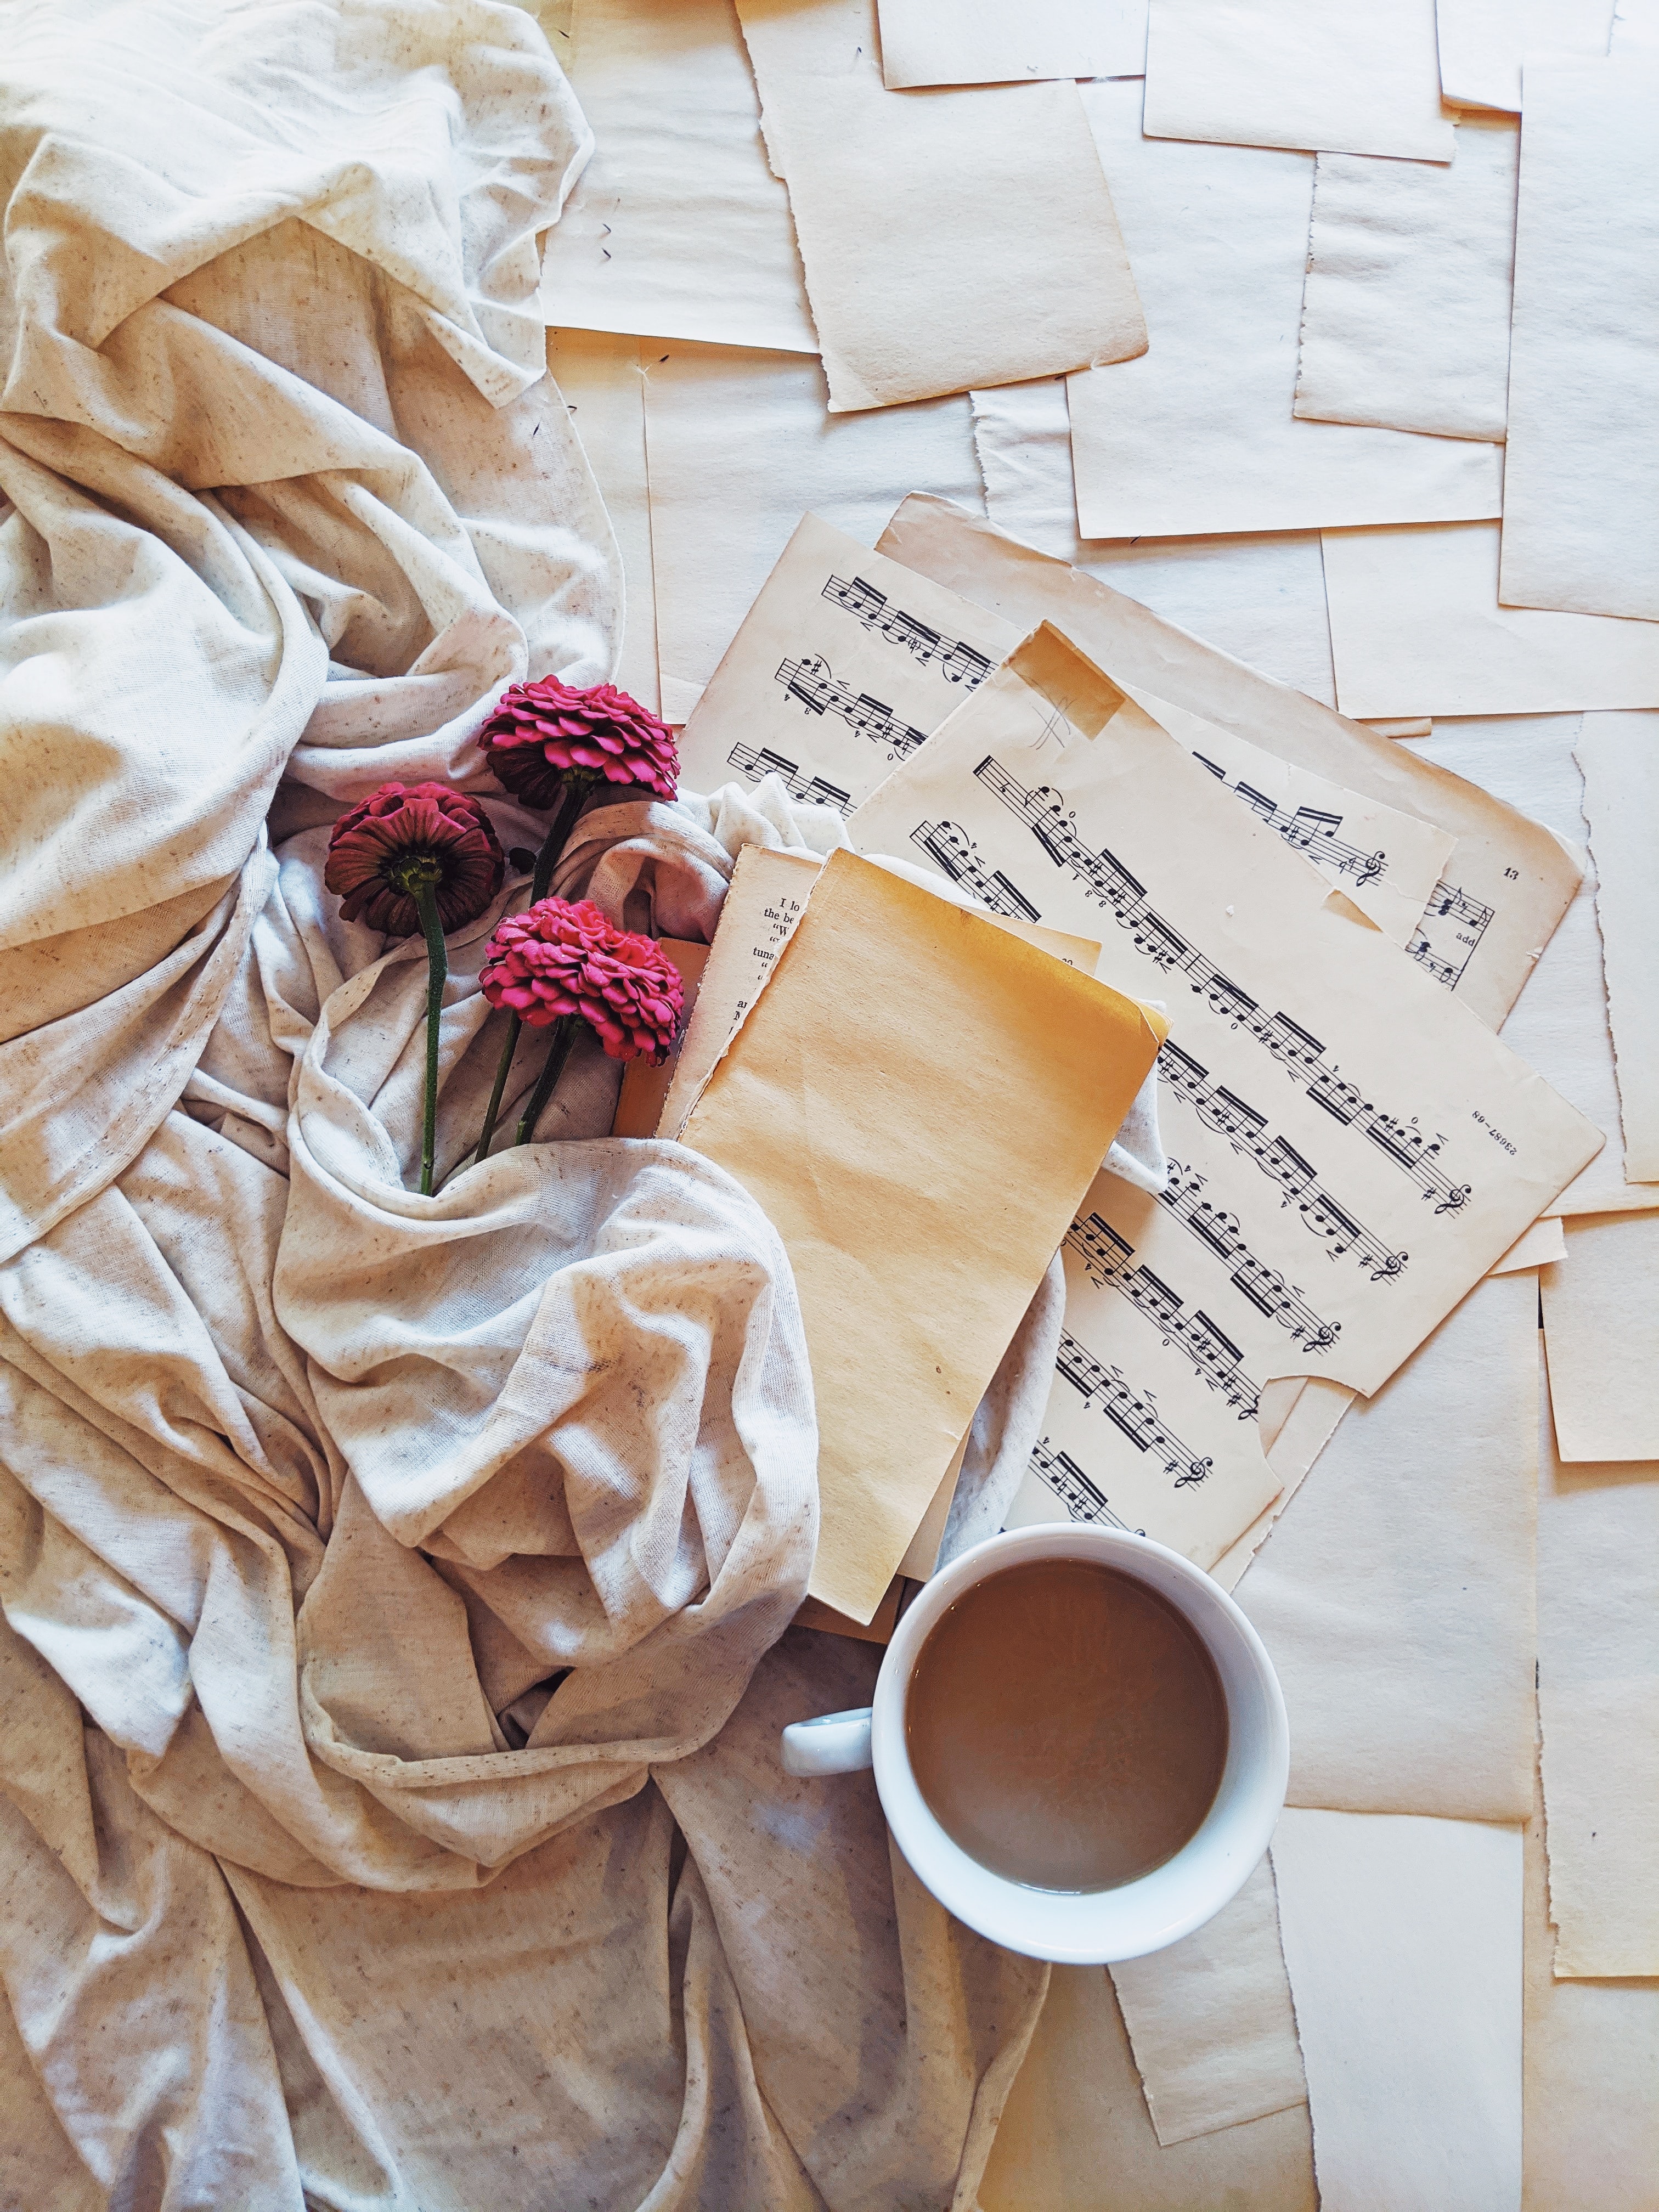 flowers, music, miscellanea, miscellaneous, cup, cloth, notes